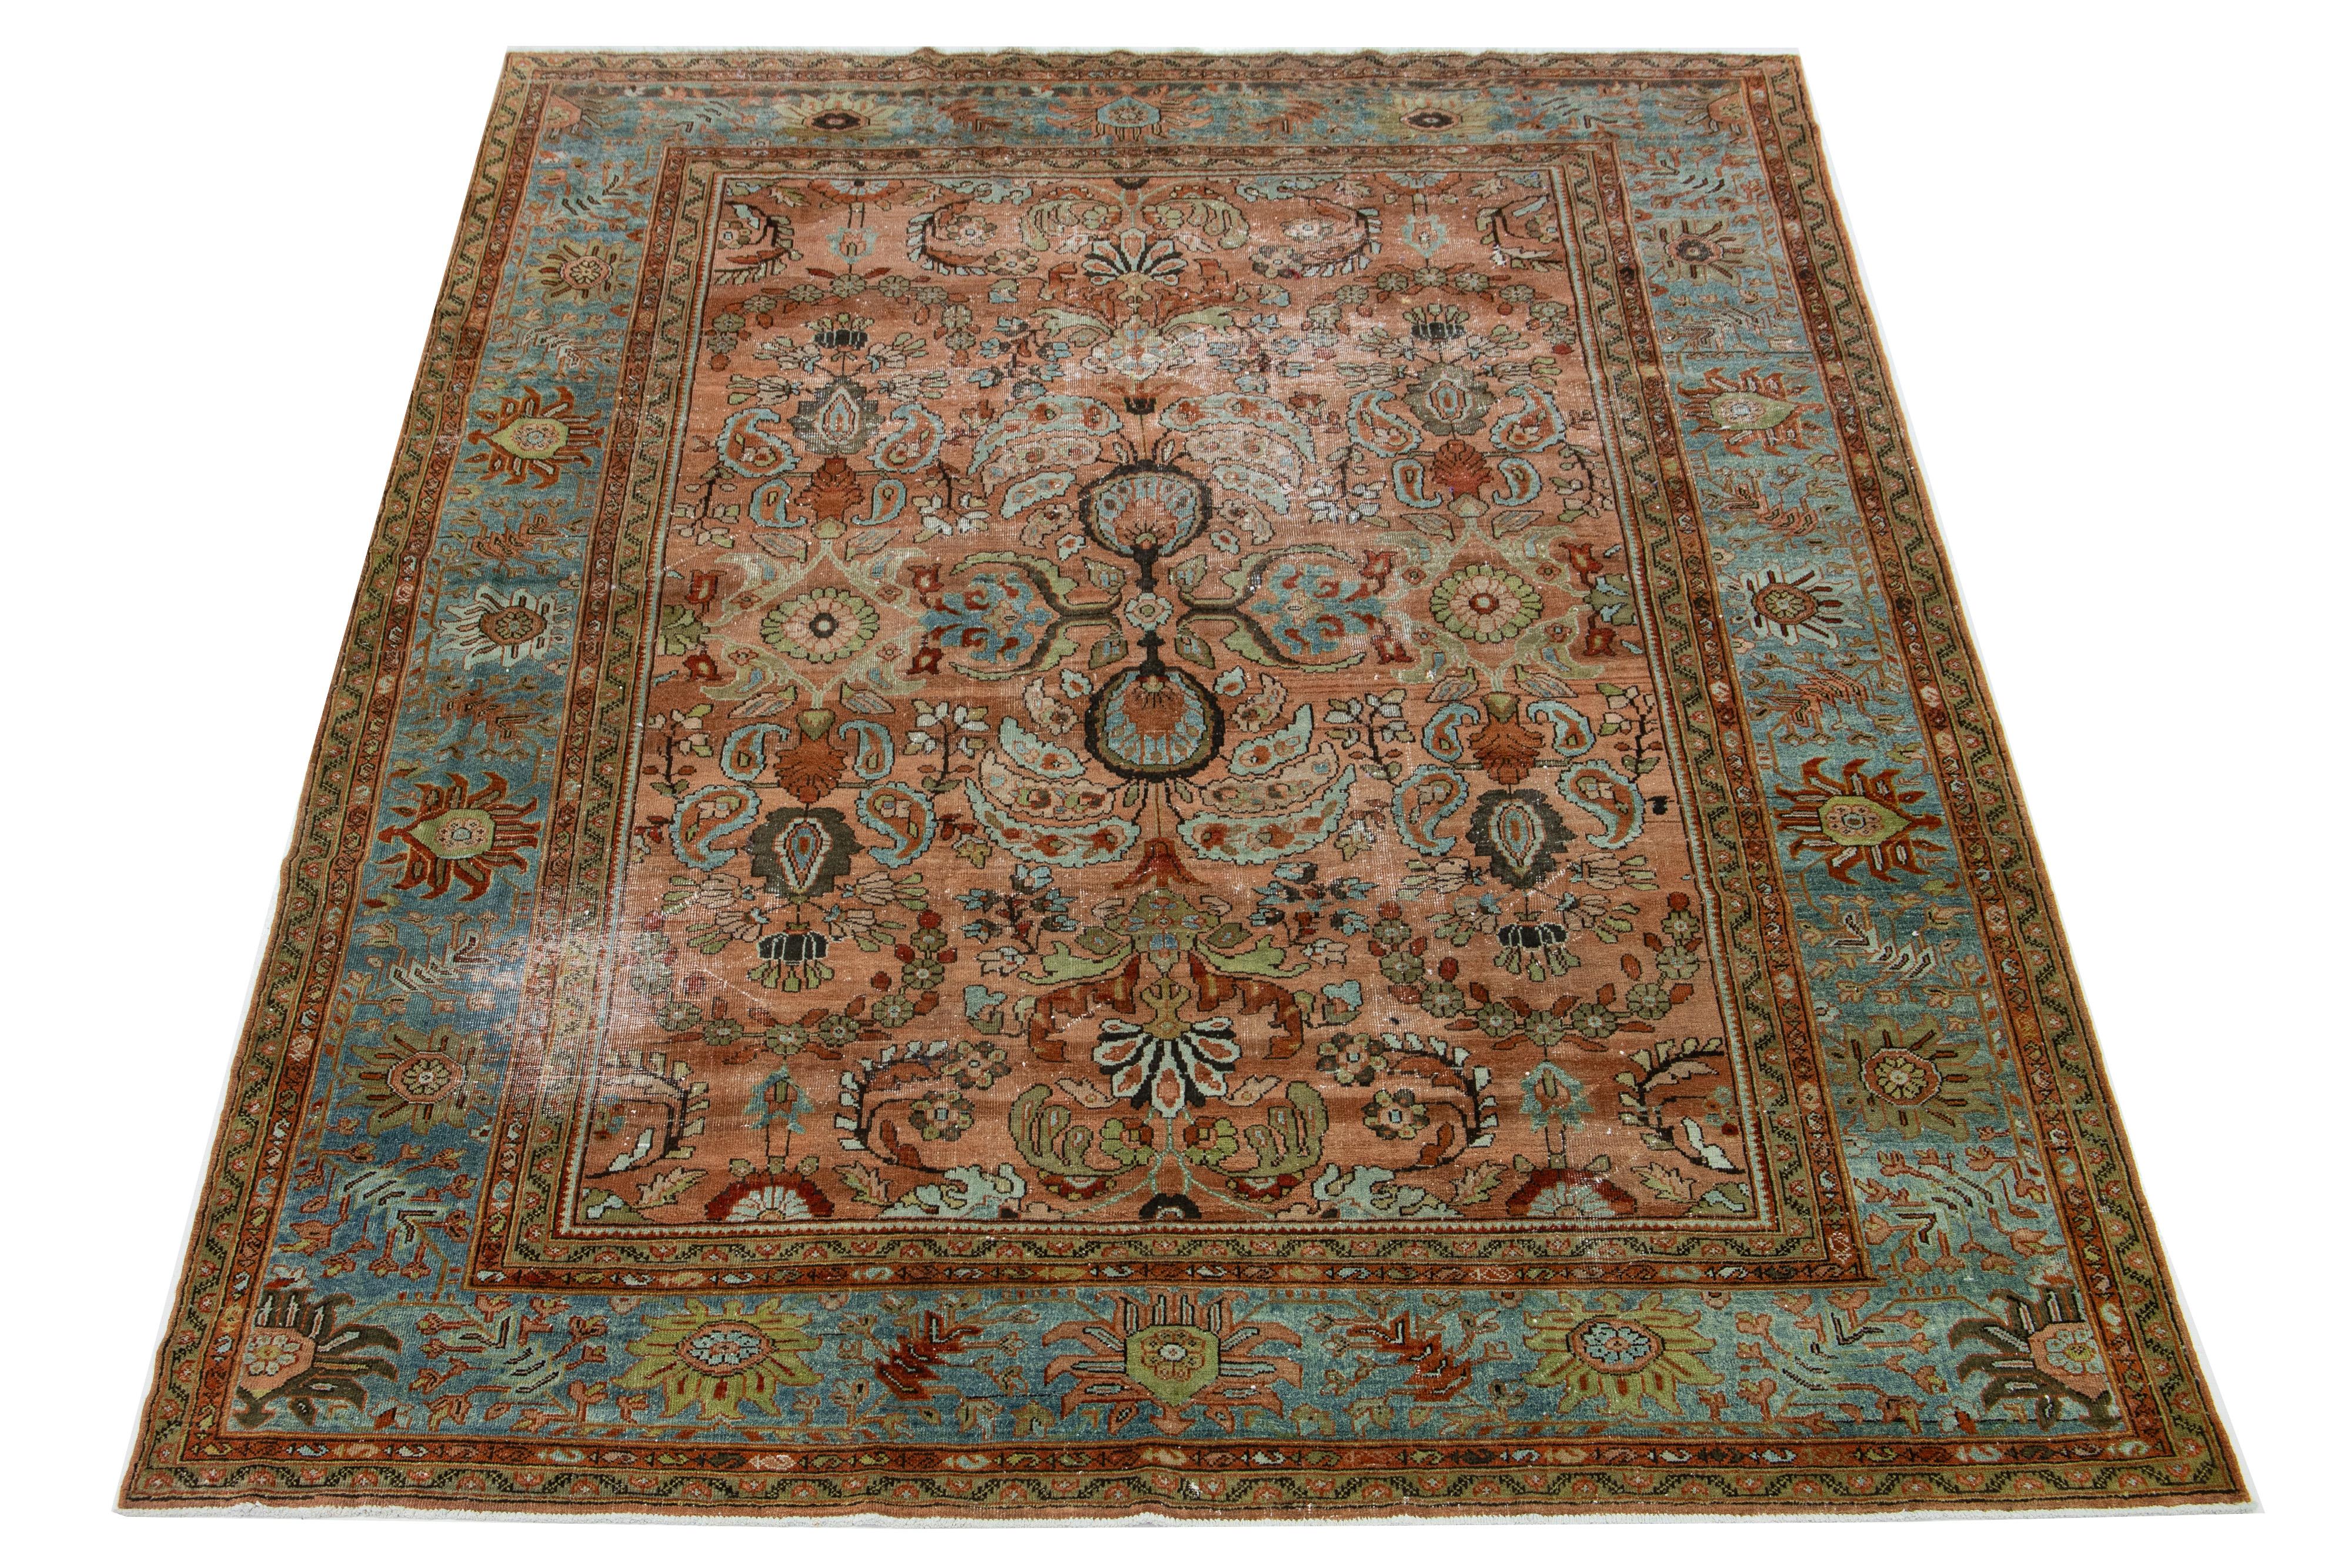 Beautiful hand-knotted 1890s antique Sultanabad wool rug with an orange-rust color field. This Persian rug has orange, green, and blue accent colors in an all-over floral design. This Classic rug design is made to last with a strong wool weave from